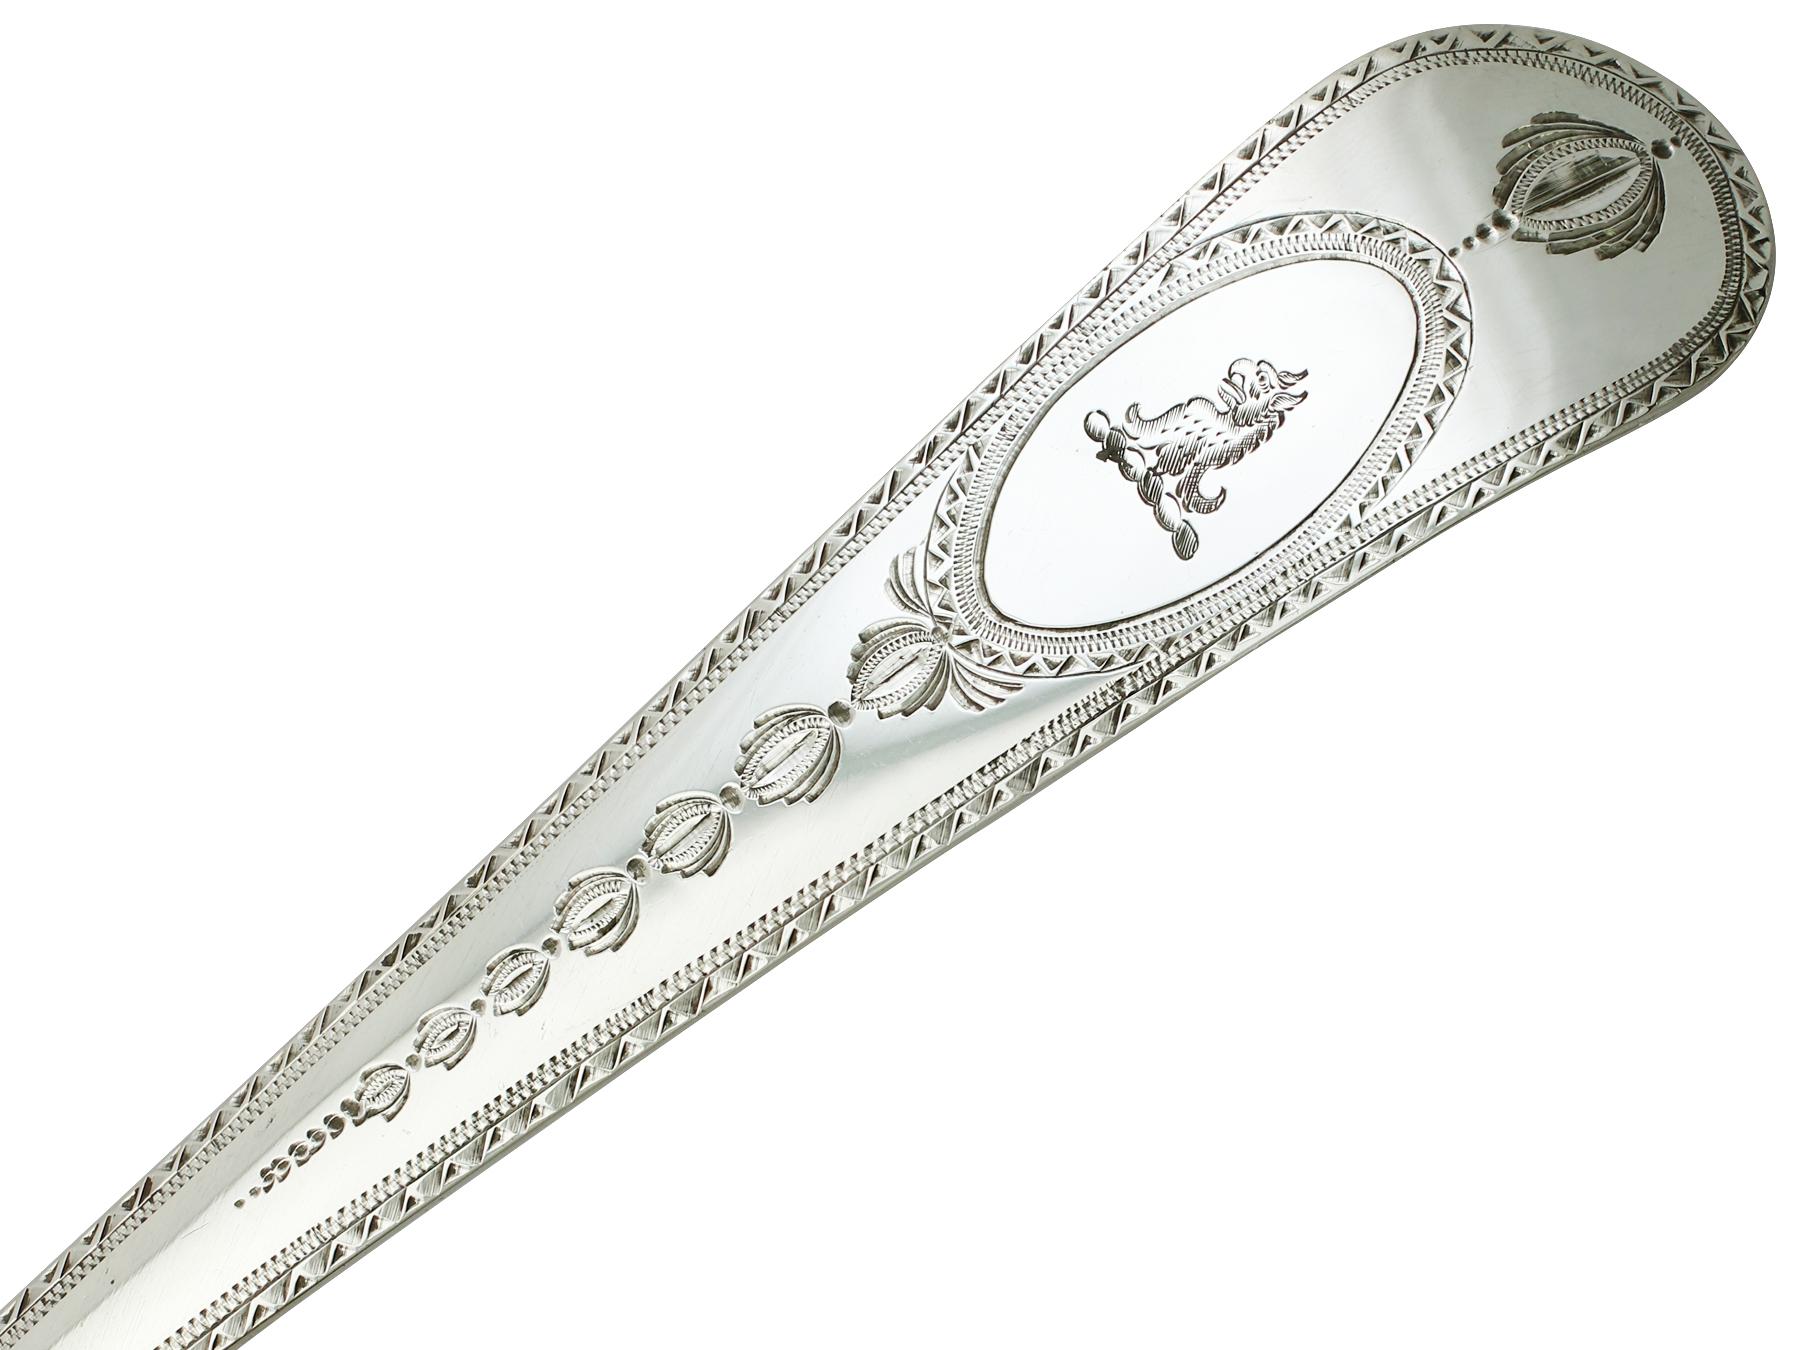 18th Century Georgian English Sterling Silver Soup Ladle by Hester Bateman 1